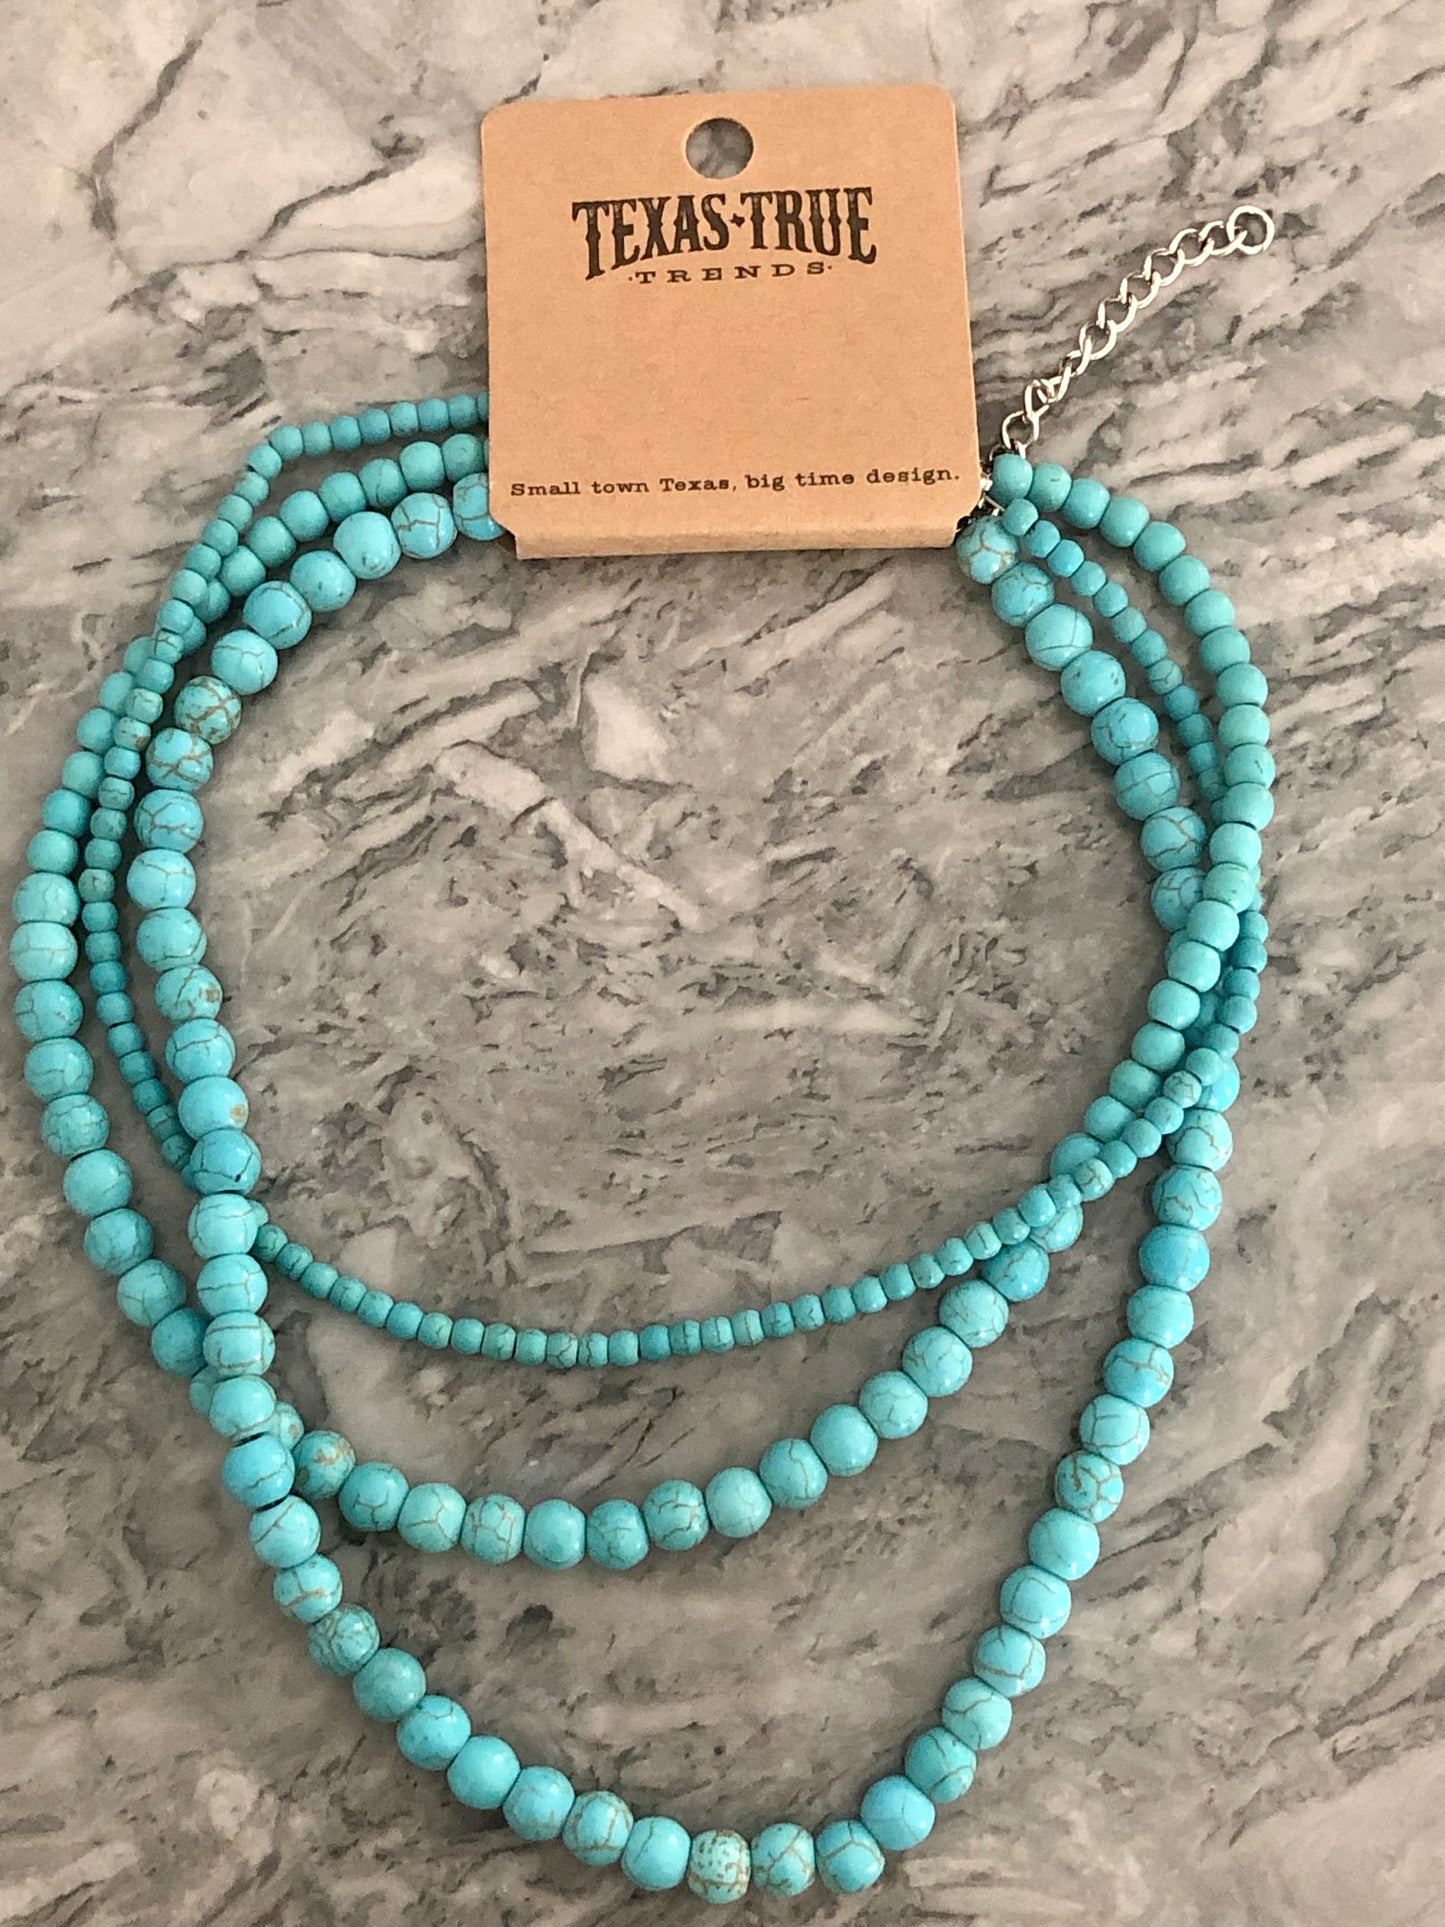 Spearman triple strand turquoise necklace